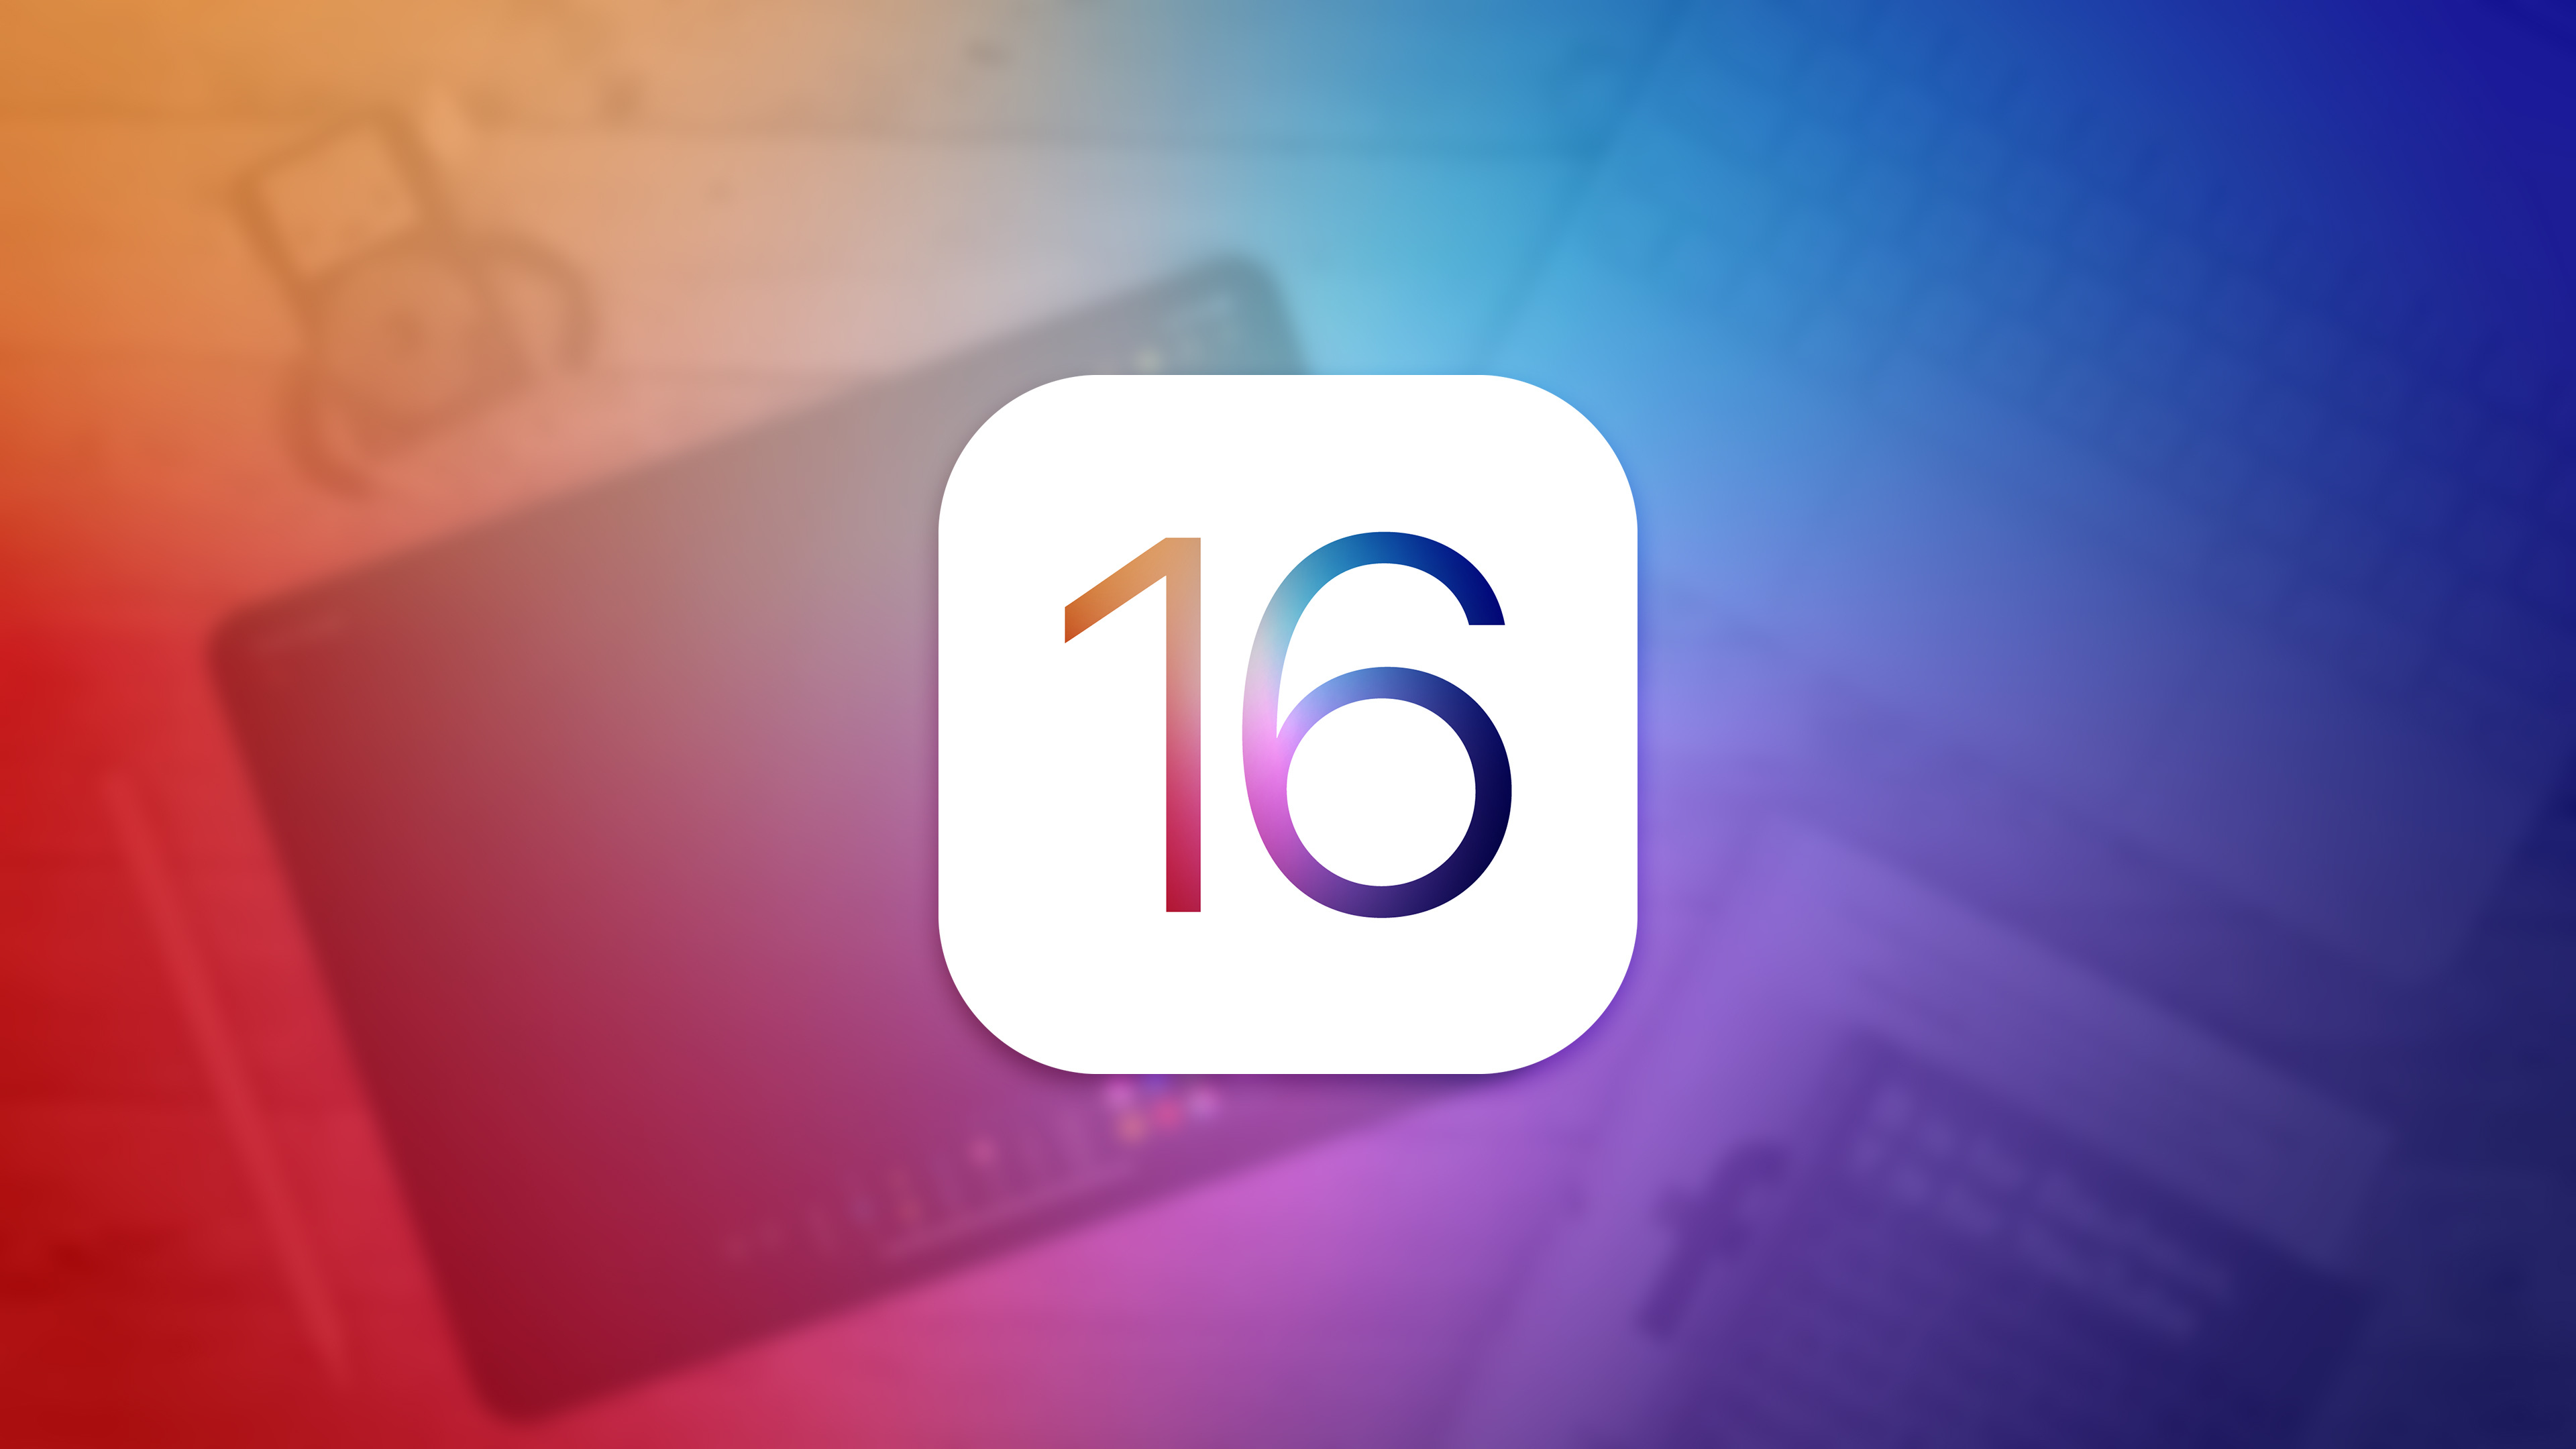 First Public Beta of iOS 16 Expected in July, Will Coincide With Third Developer Beta